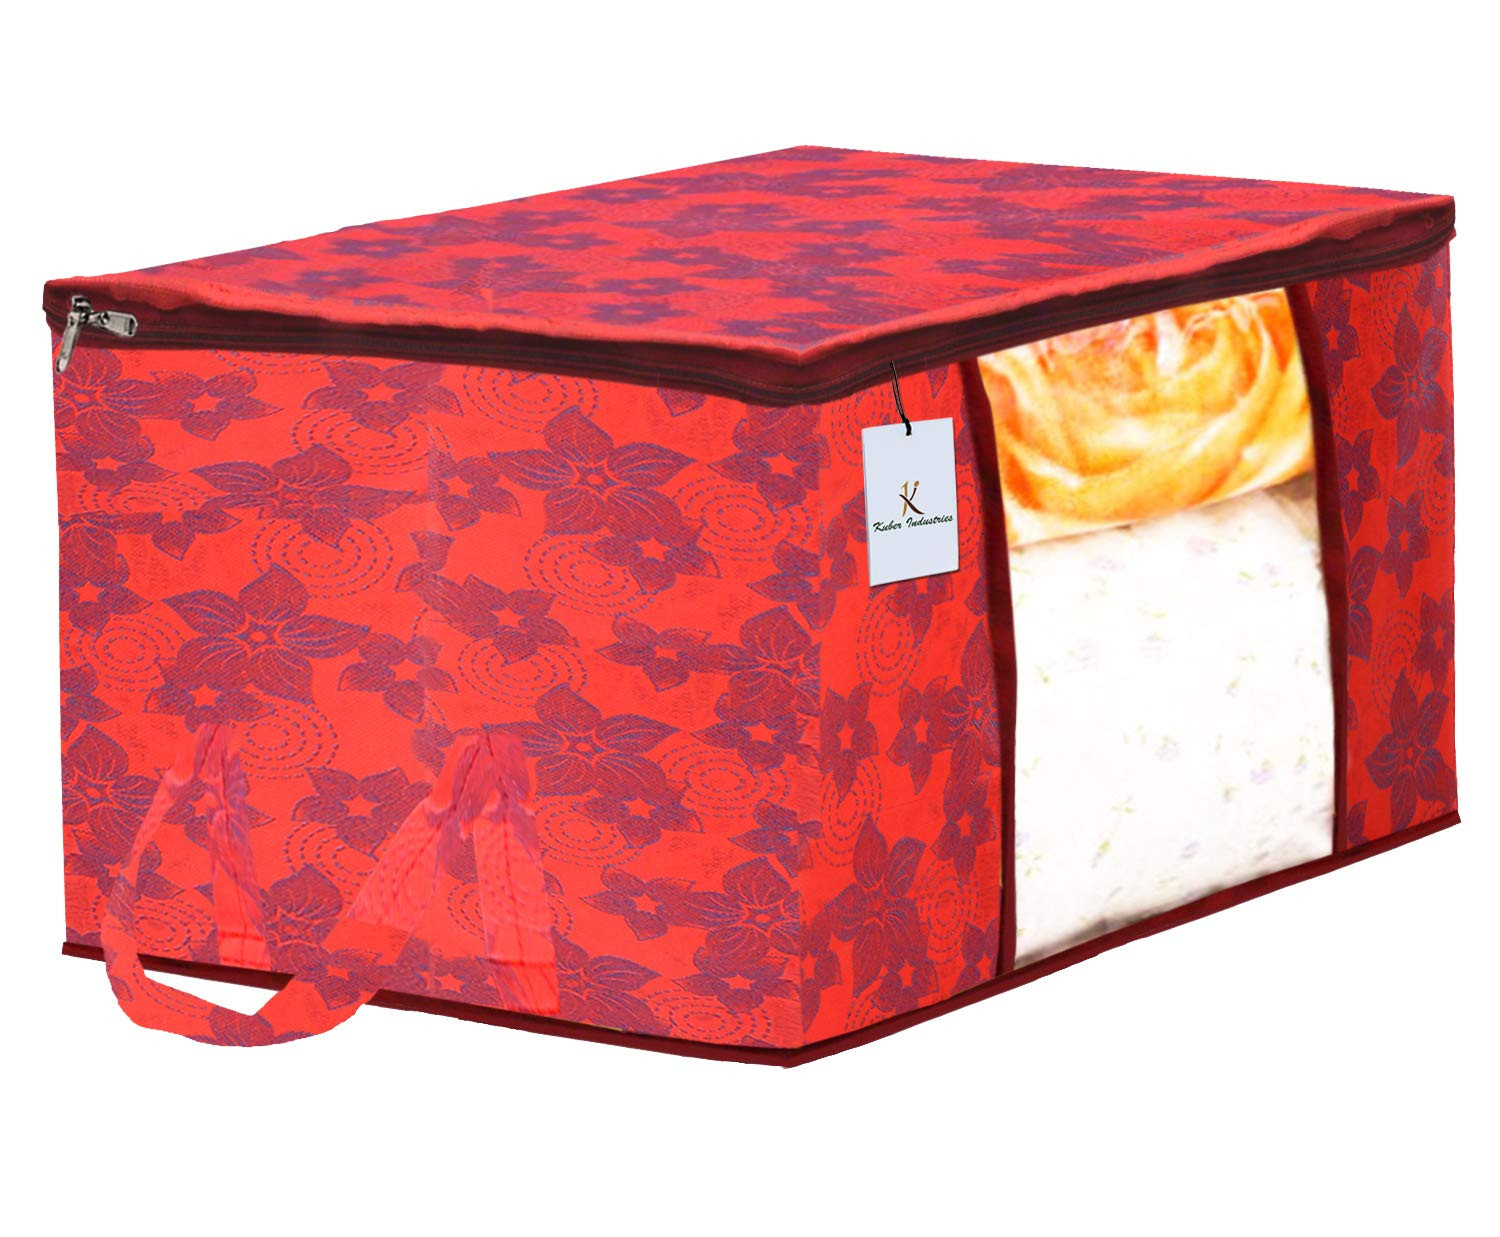 Kuber Industries Metalic Printed Non Woven Saree Cover And Underbed Storage Bag, Storage Organiser, Blanket Cover, Gold & Red & Beige  -CTKTC42403